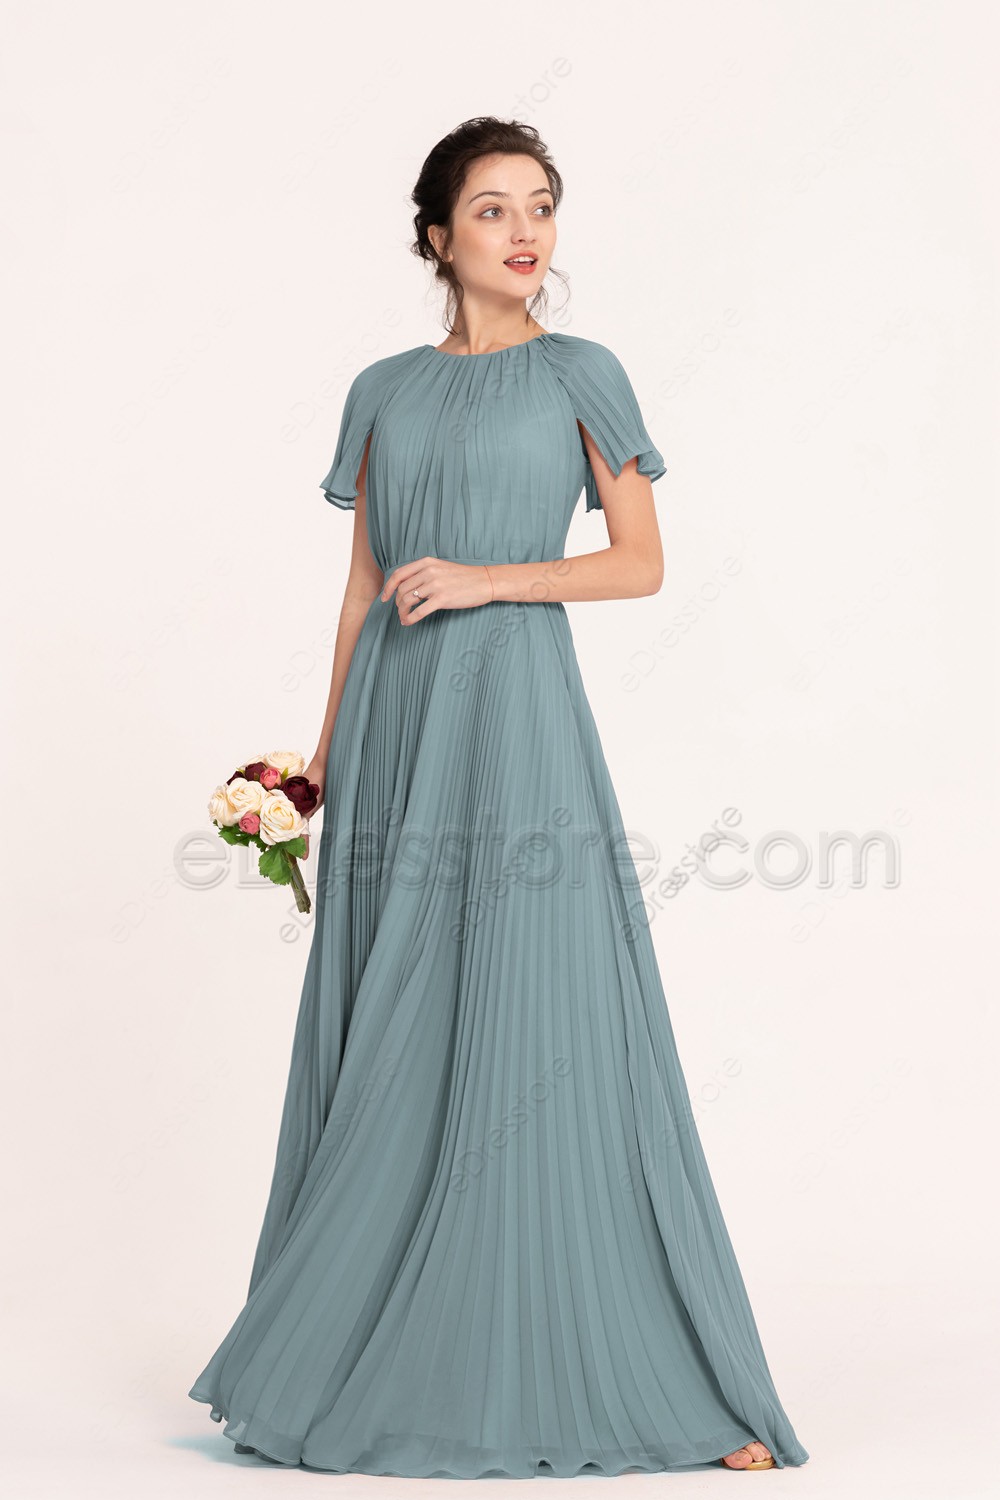 Modest Mother of the Bride Dress ...